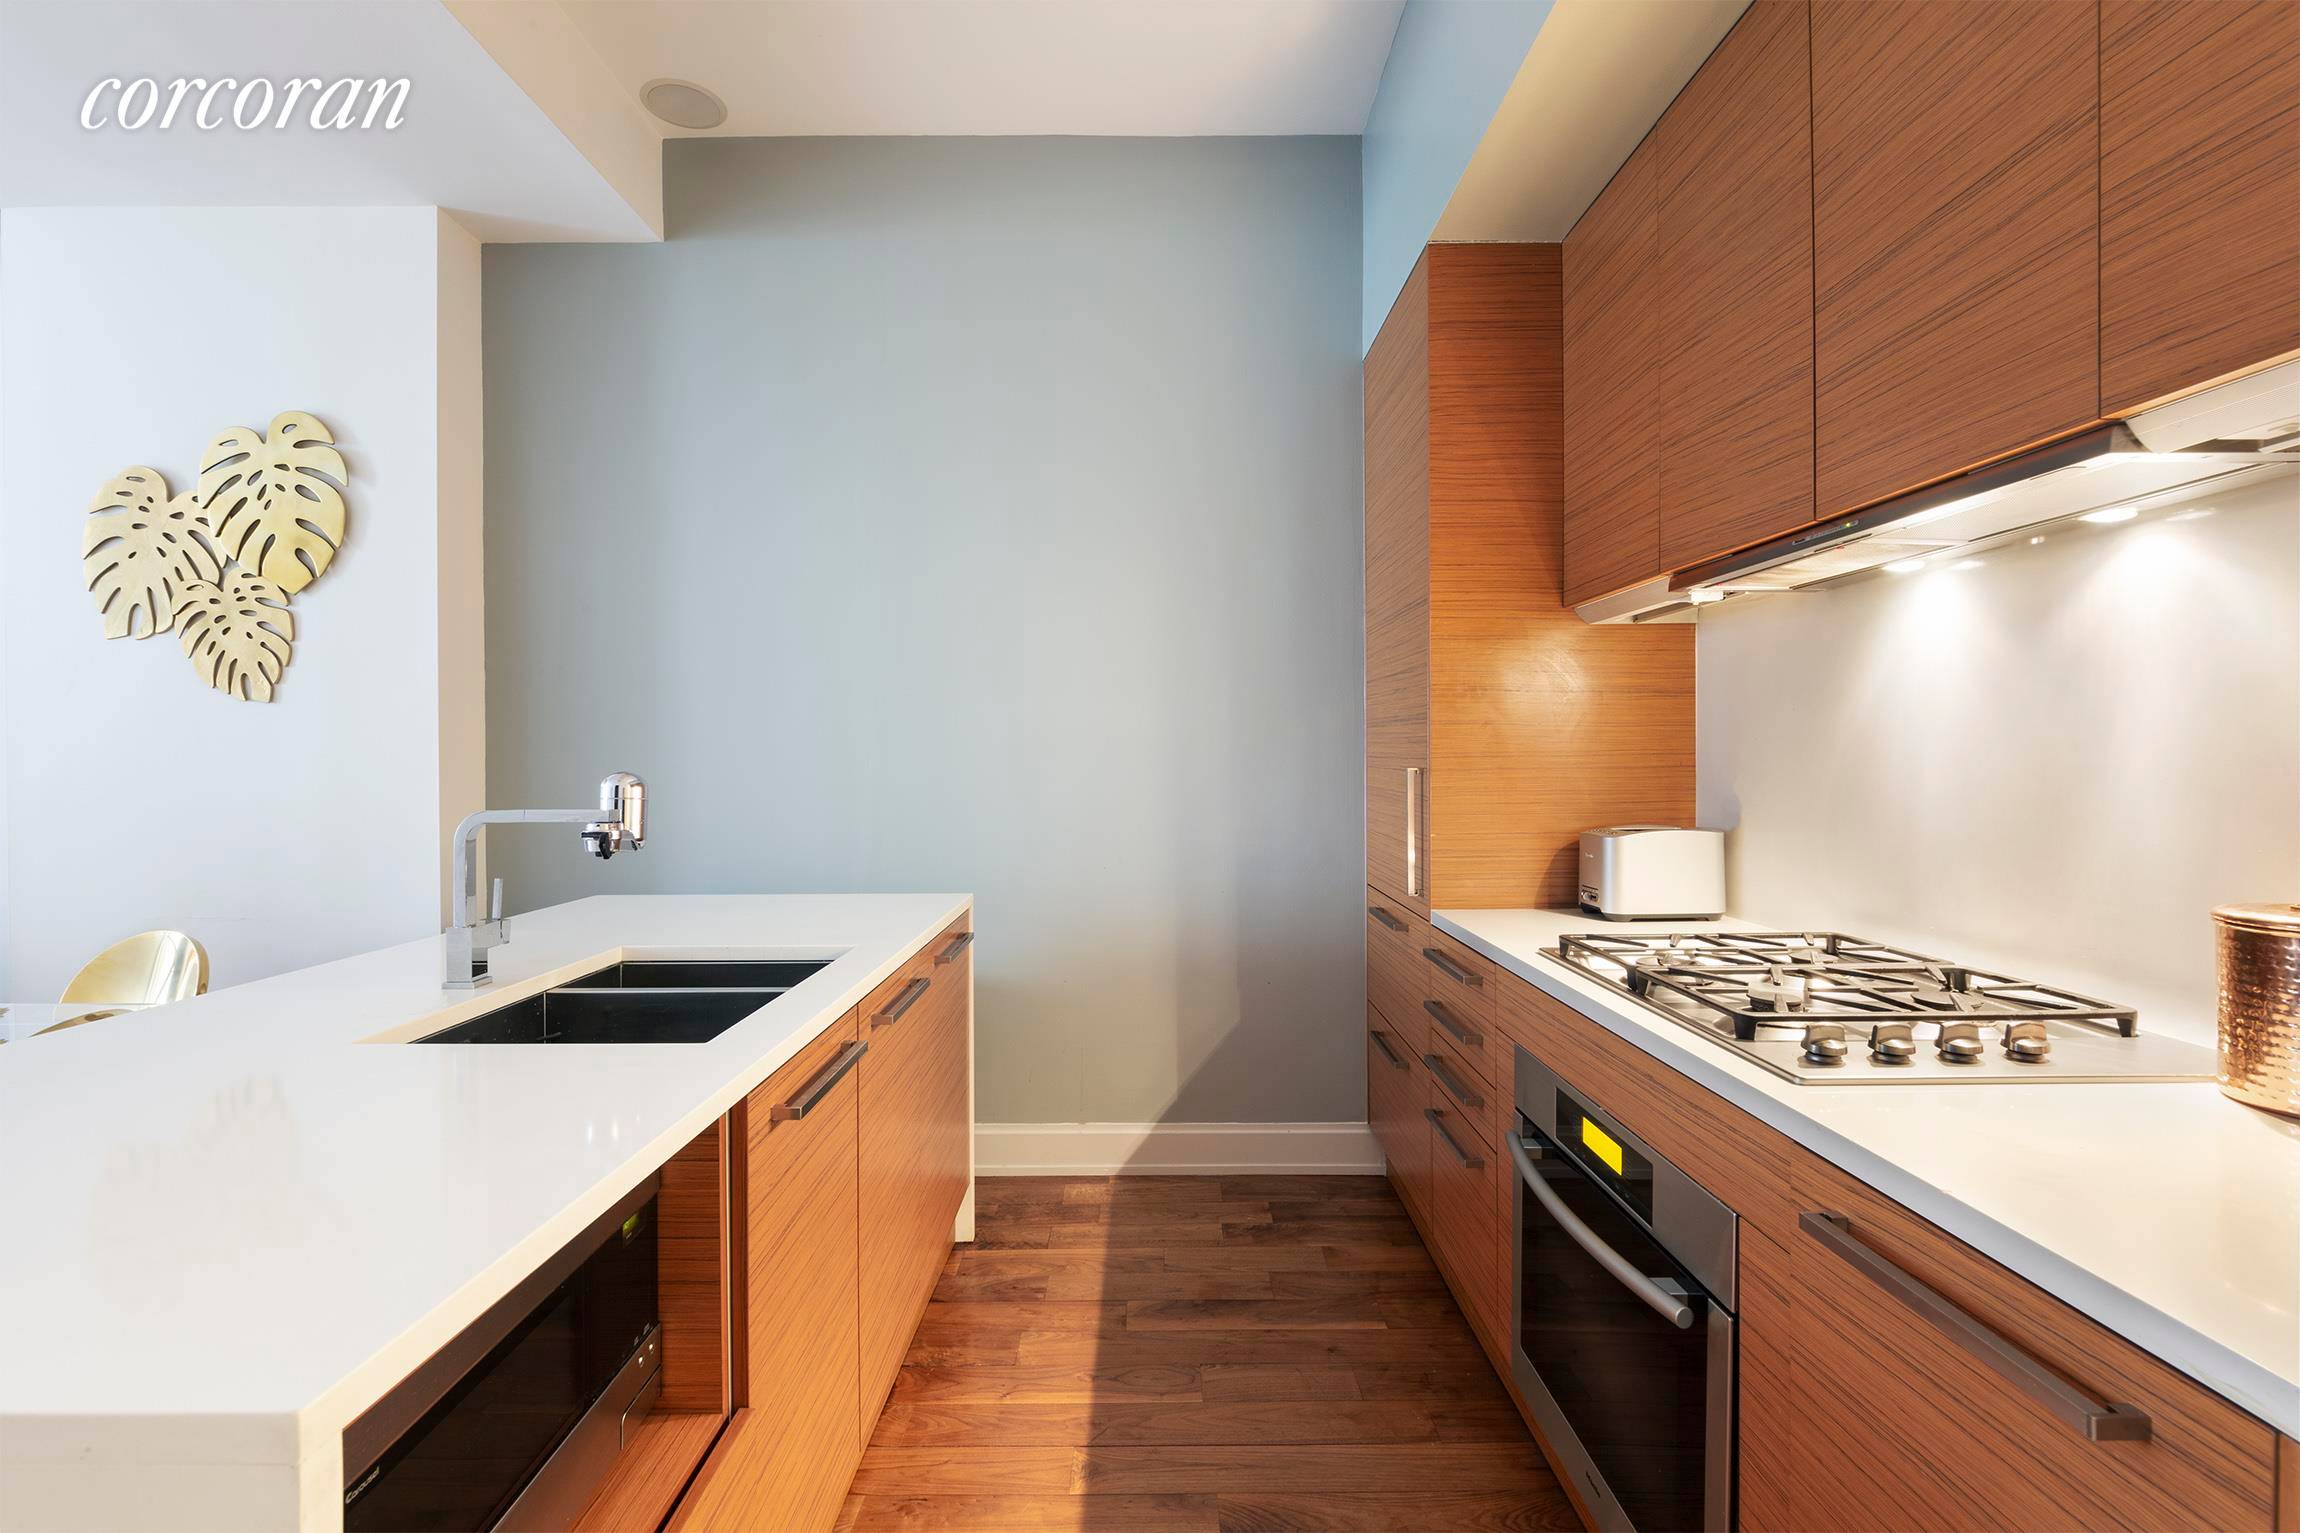 South facing one bedroom, two bathroom with home office and terrace, in the coveted boutique condominium, The Clement Clarke.